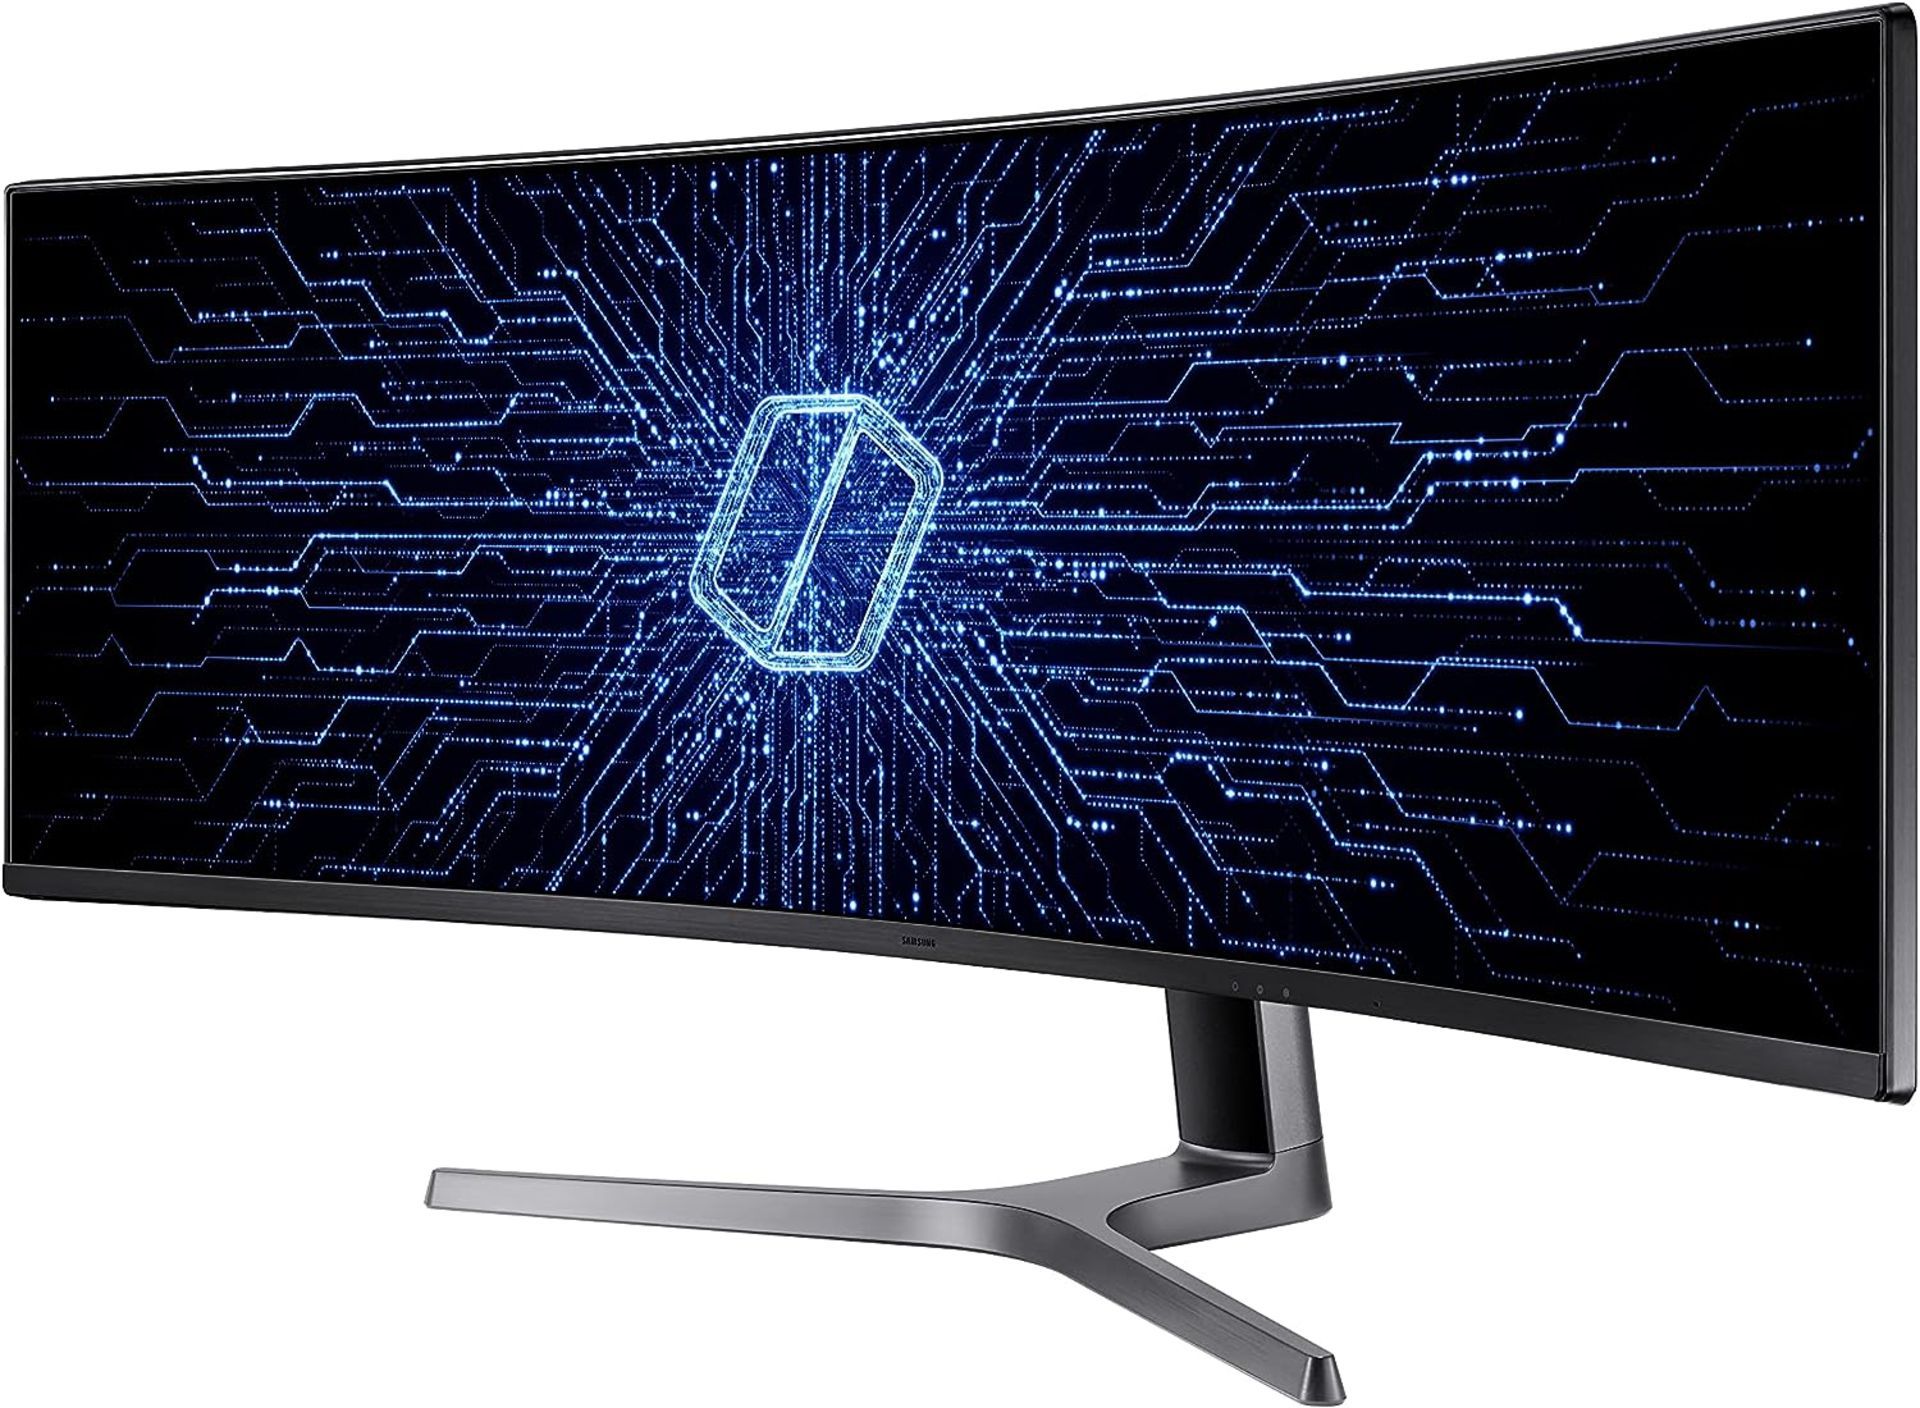 BRAND NEW FACTORY SEALED SAMSUNG CRG9 49 Inch Ultra-Wide Dual-QHD 120Hz Odyssey Monitor. RRP £1249.